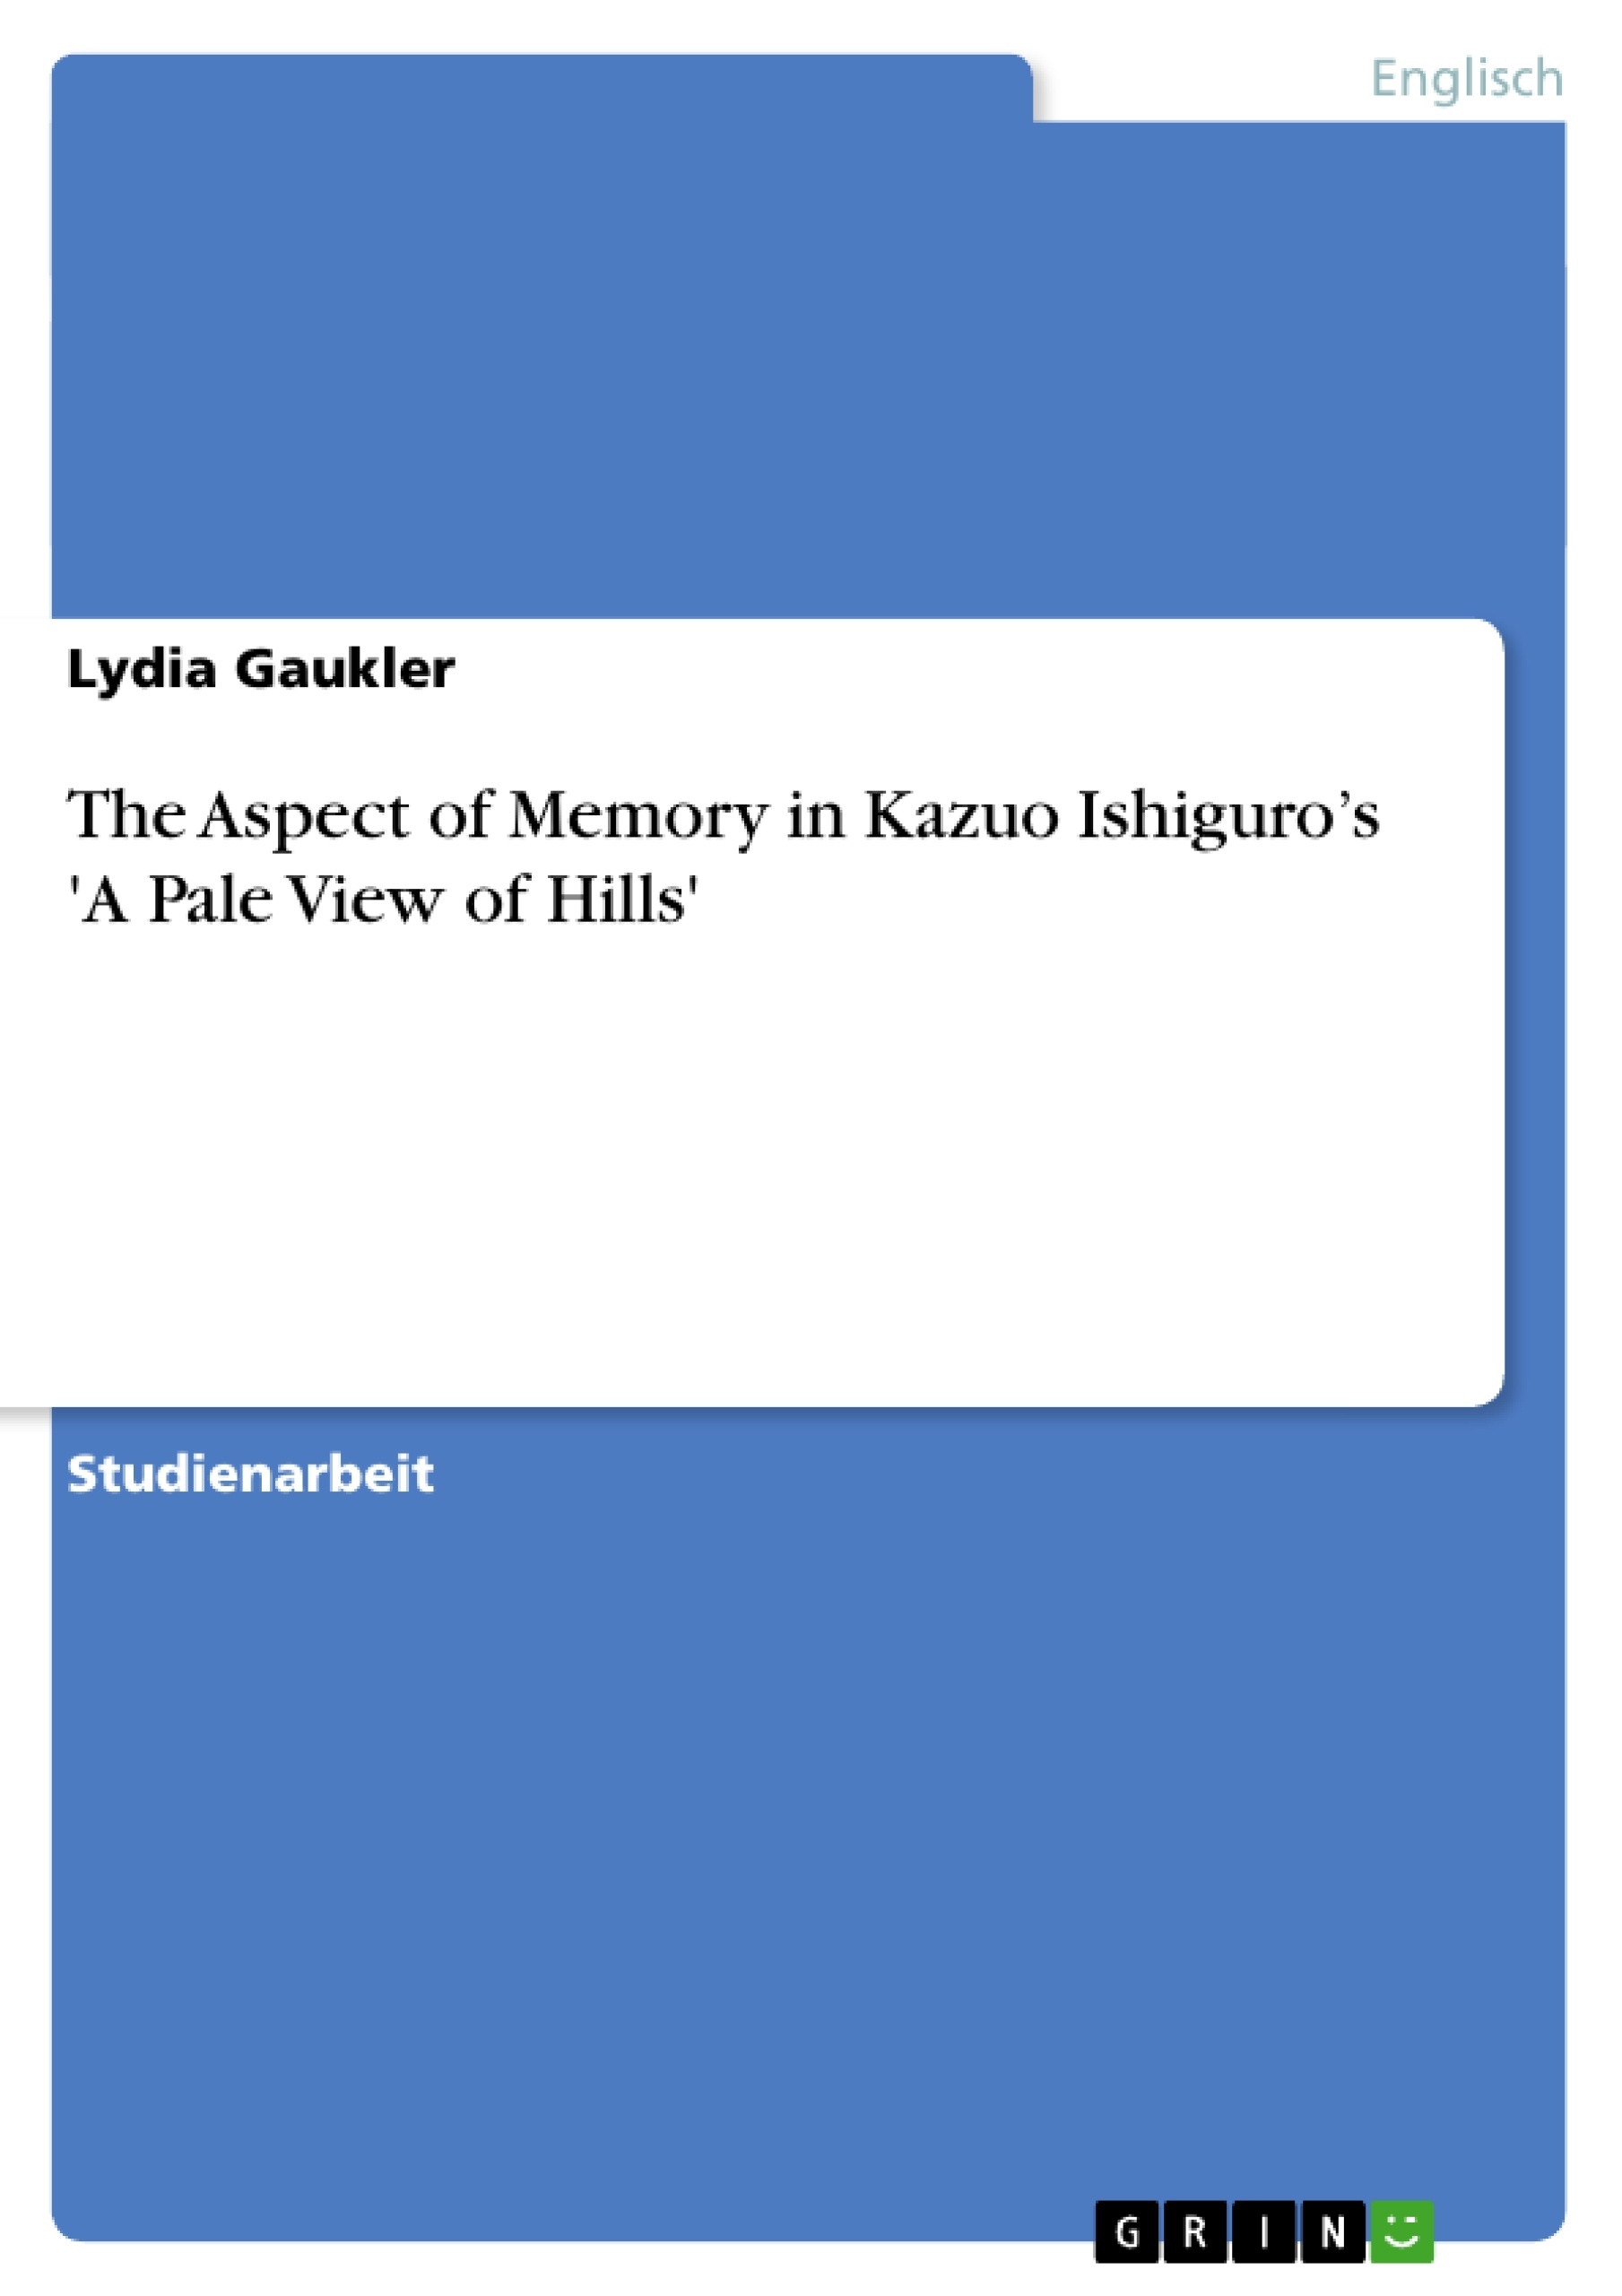 Titel: The Aspect of Memory in Kazuo Ishiguro’s 'A Pale View of Hills'